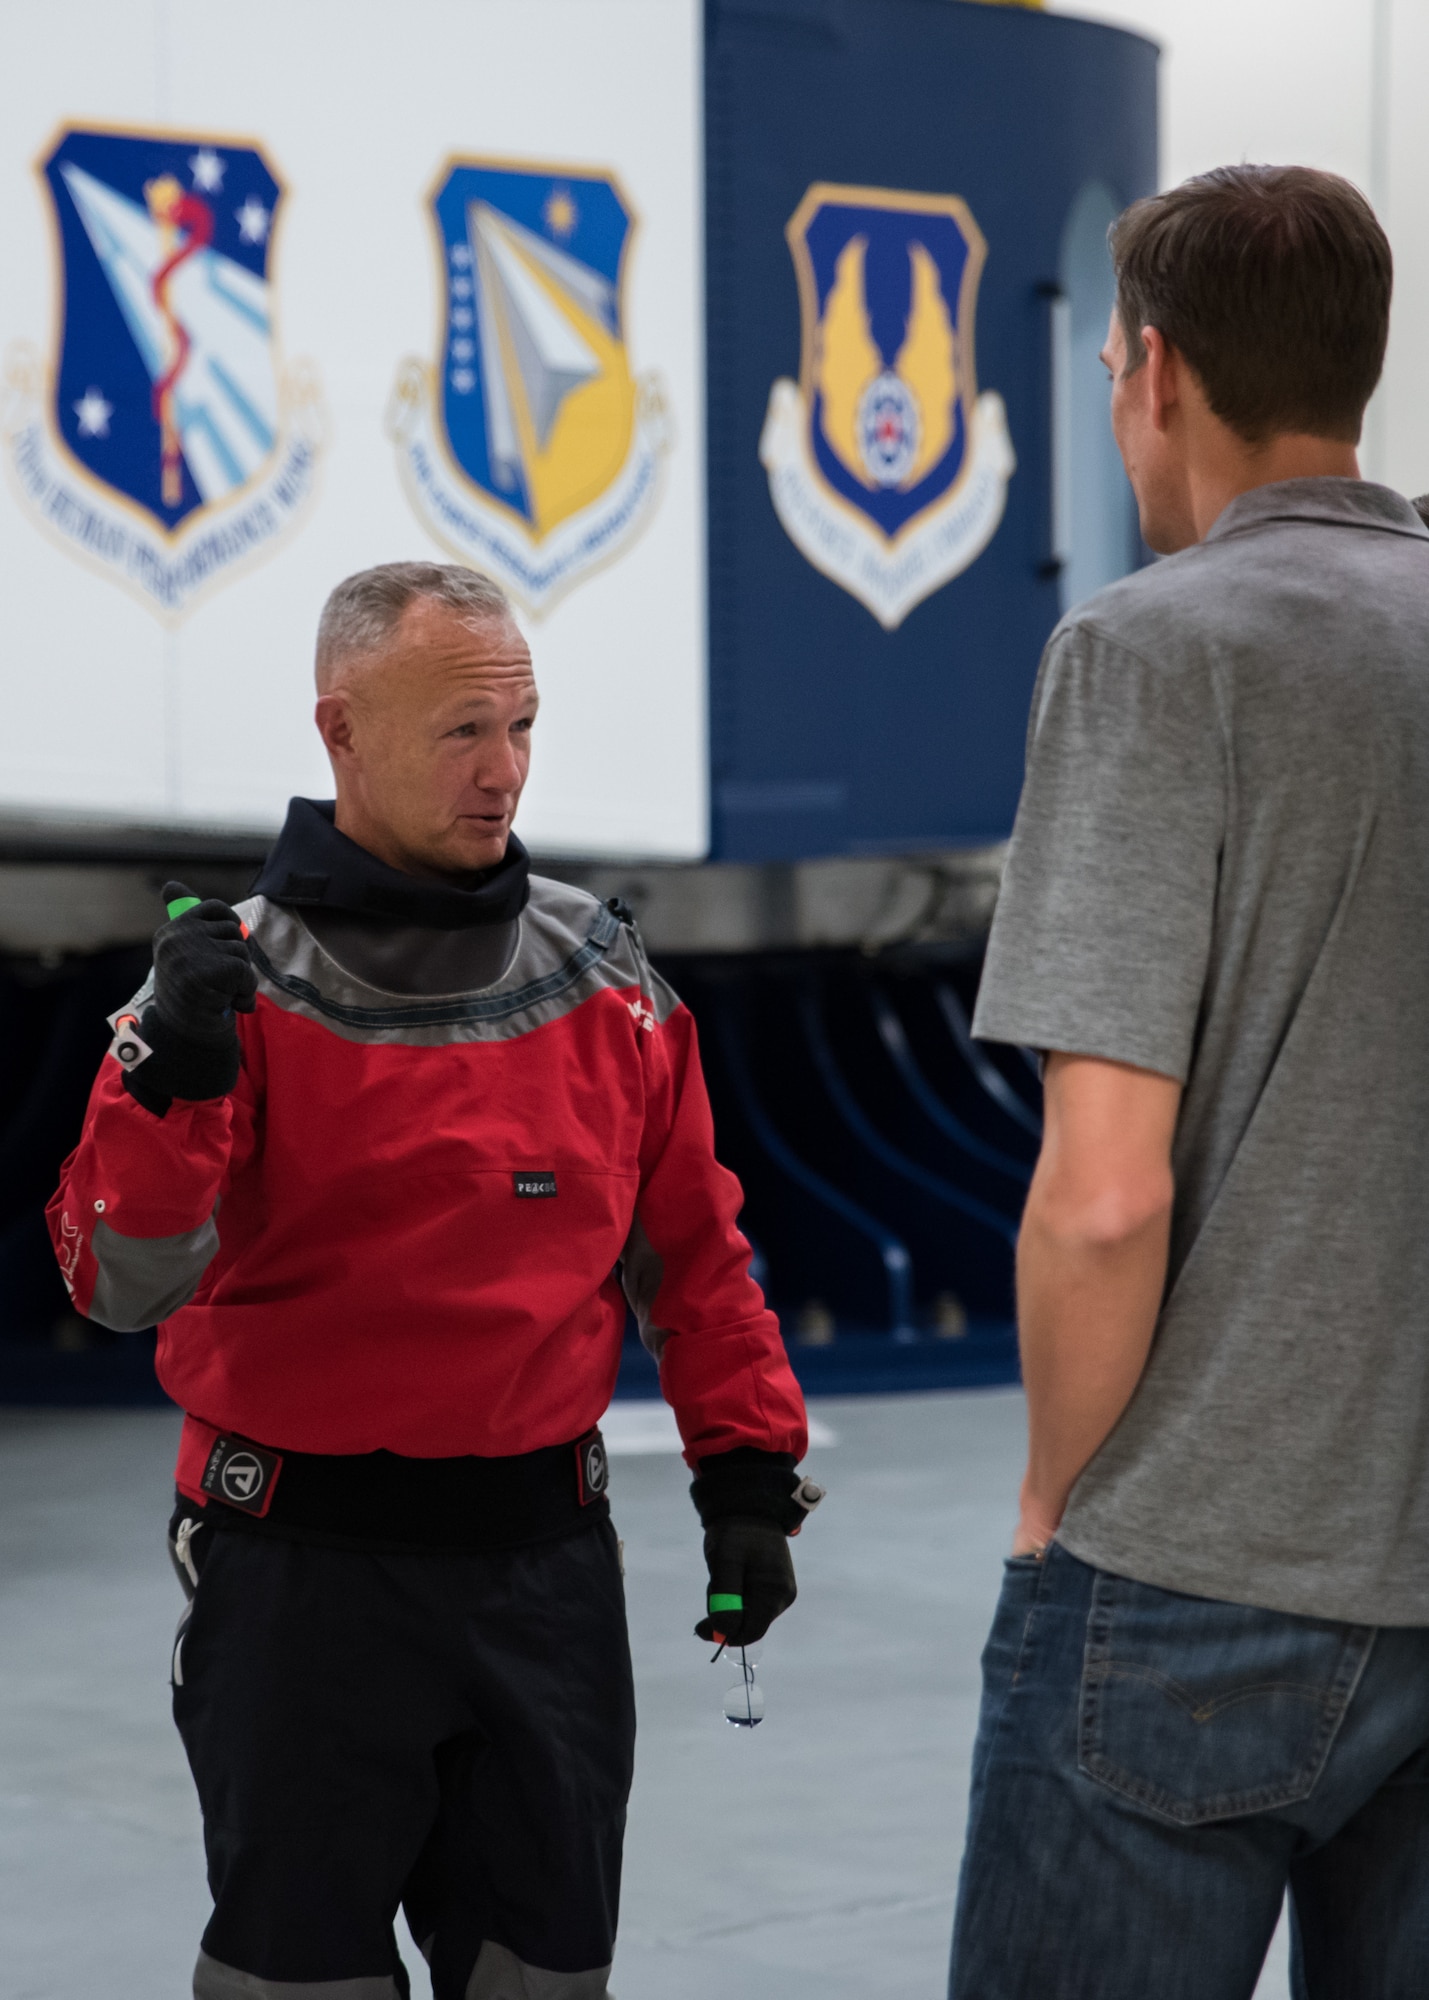 NASA astronaut Douglas Hurley speaks with a NASA engineer just before getting into the Air Force Research Laboratory’s centrifuge. Ten astronauts participated in the testing Nov. 1 and 2 – one with Boeing and nine with NASA.